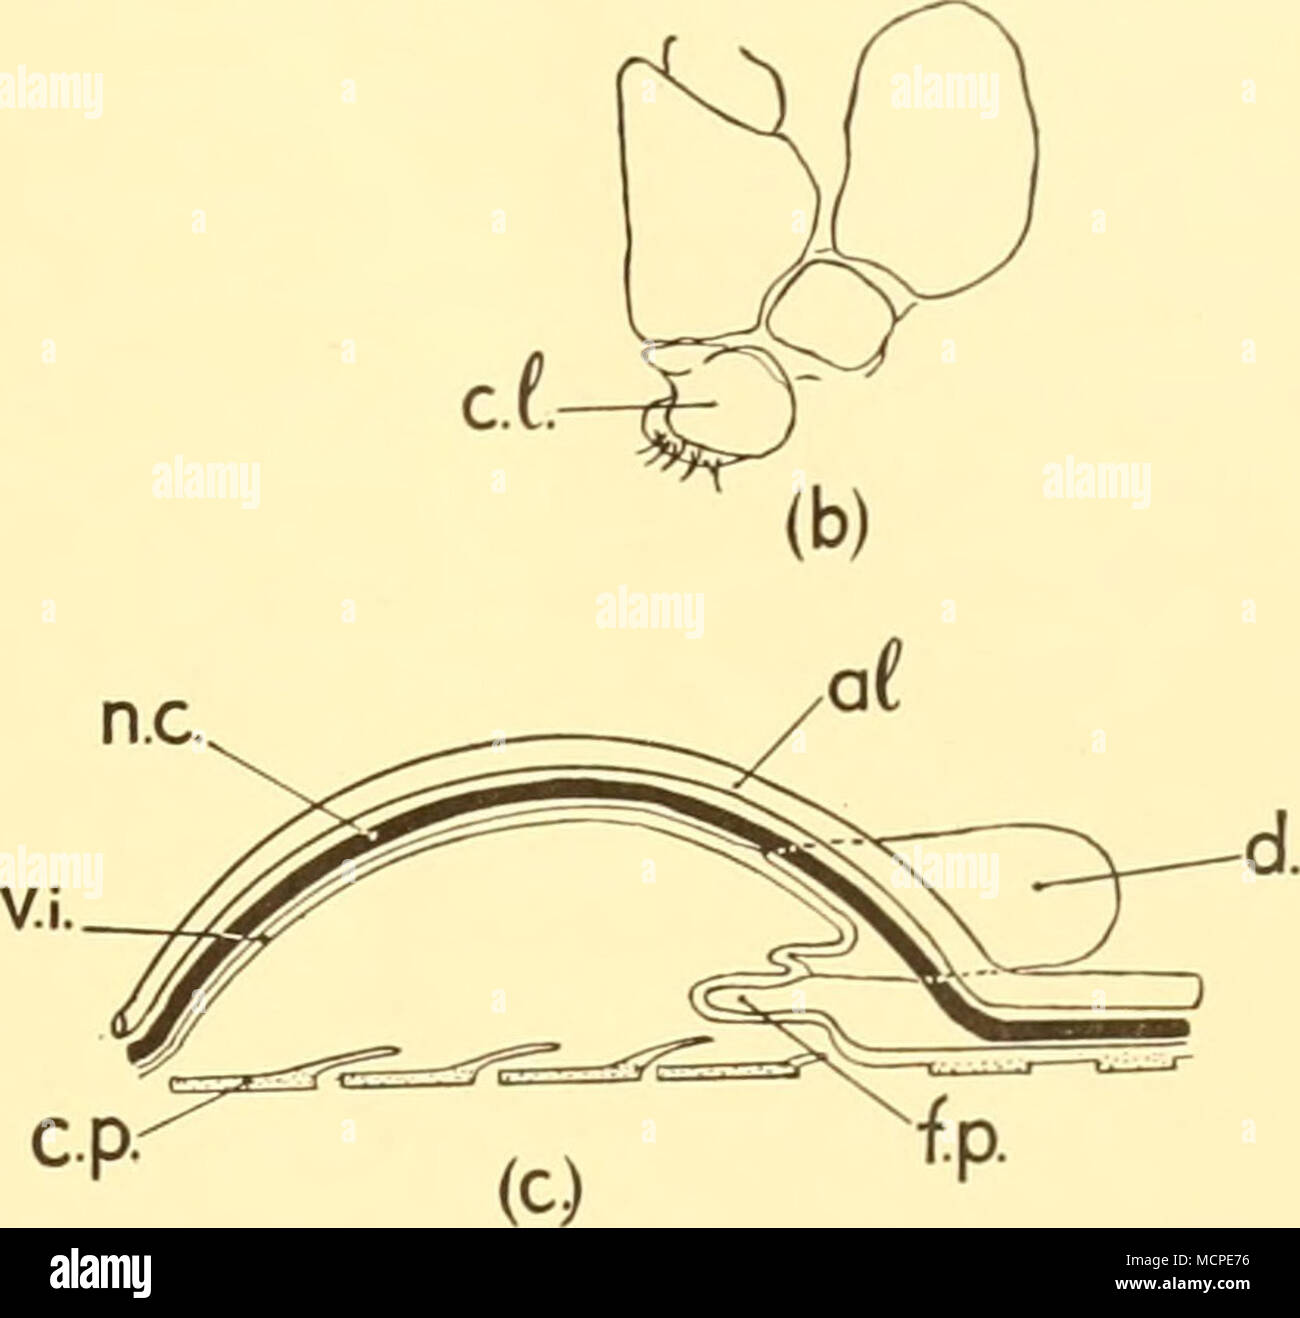 . Text-fig. 7. Edotia oculata. {a) Brood pouch from above, dorsal integument removed (diagrammatic), a.c. accessory- coxal plate; a.o. anterior opening of brood pouch; Cj, coxa of first pereiopod; c.p^, coxal plate of first pereiopod, unfused; c.p.., coxal plate of second pereiopod, fused; c.p.^, coxal plate of fourth pereiopod, unfused; d, diverticulum of brood pouch; ex, soft extension of coxal plate; /.c./&gt;. free part of coxal plate; f.p. fold of posterior wall of brood pouch; /, limit of brood pouch ; Ip. hne showing displacement of ventral integument, dorsally and laterally, {b) Base o Stock Photo